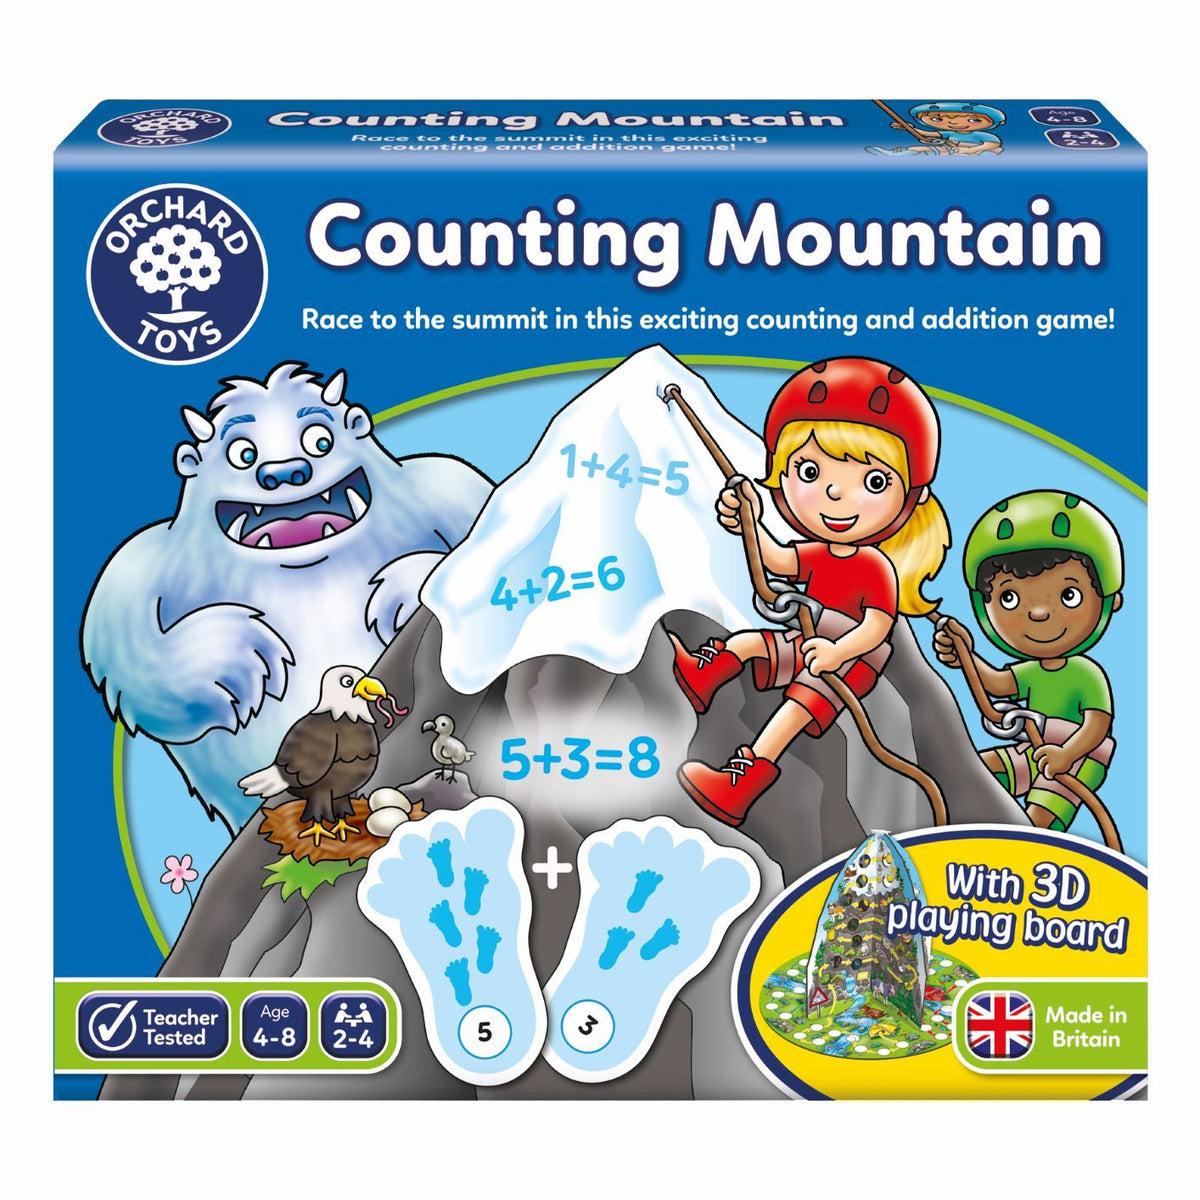 Orchard Game - Counting Mountain